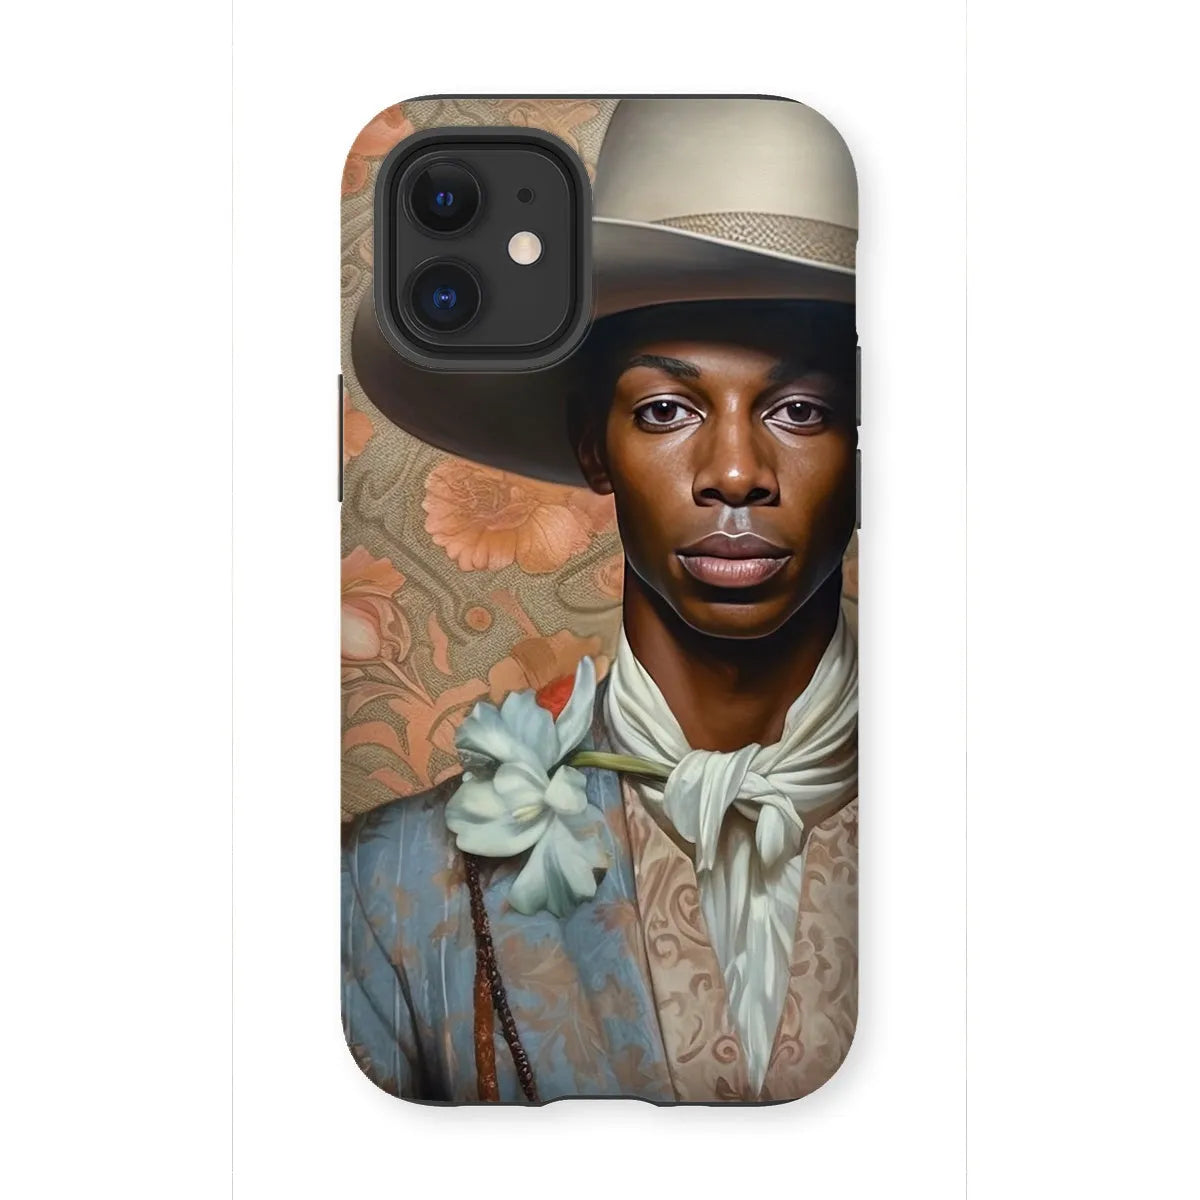 Apollo The Gay Cowboy - Gay Aesthetic Art Phone Case - Iphone 12 Mini / Matte - Mobile Phone Cases - Aesthetic Art